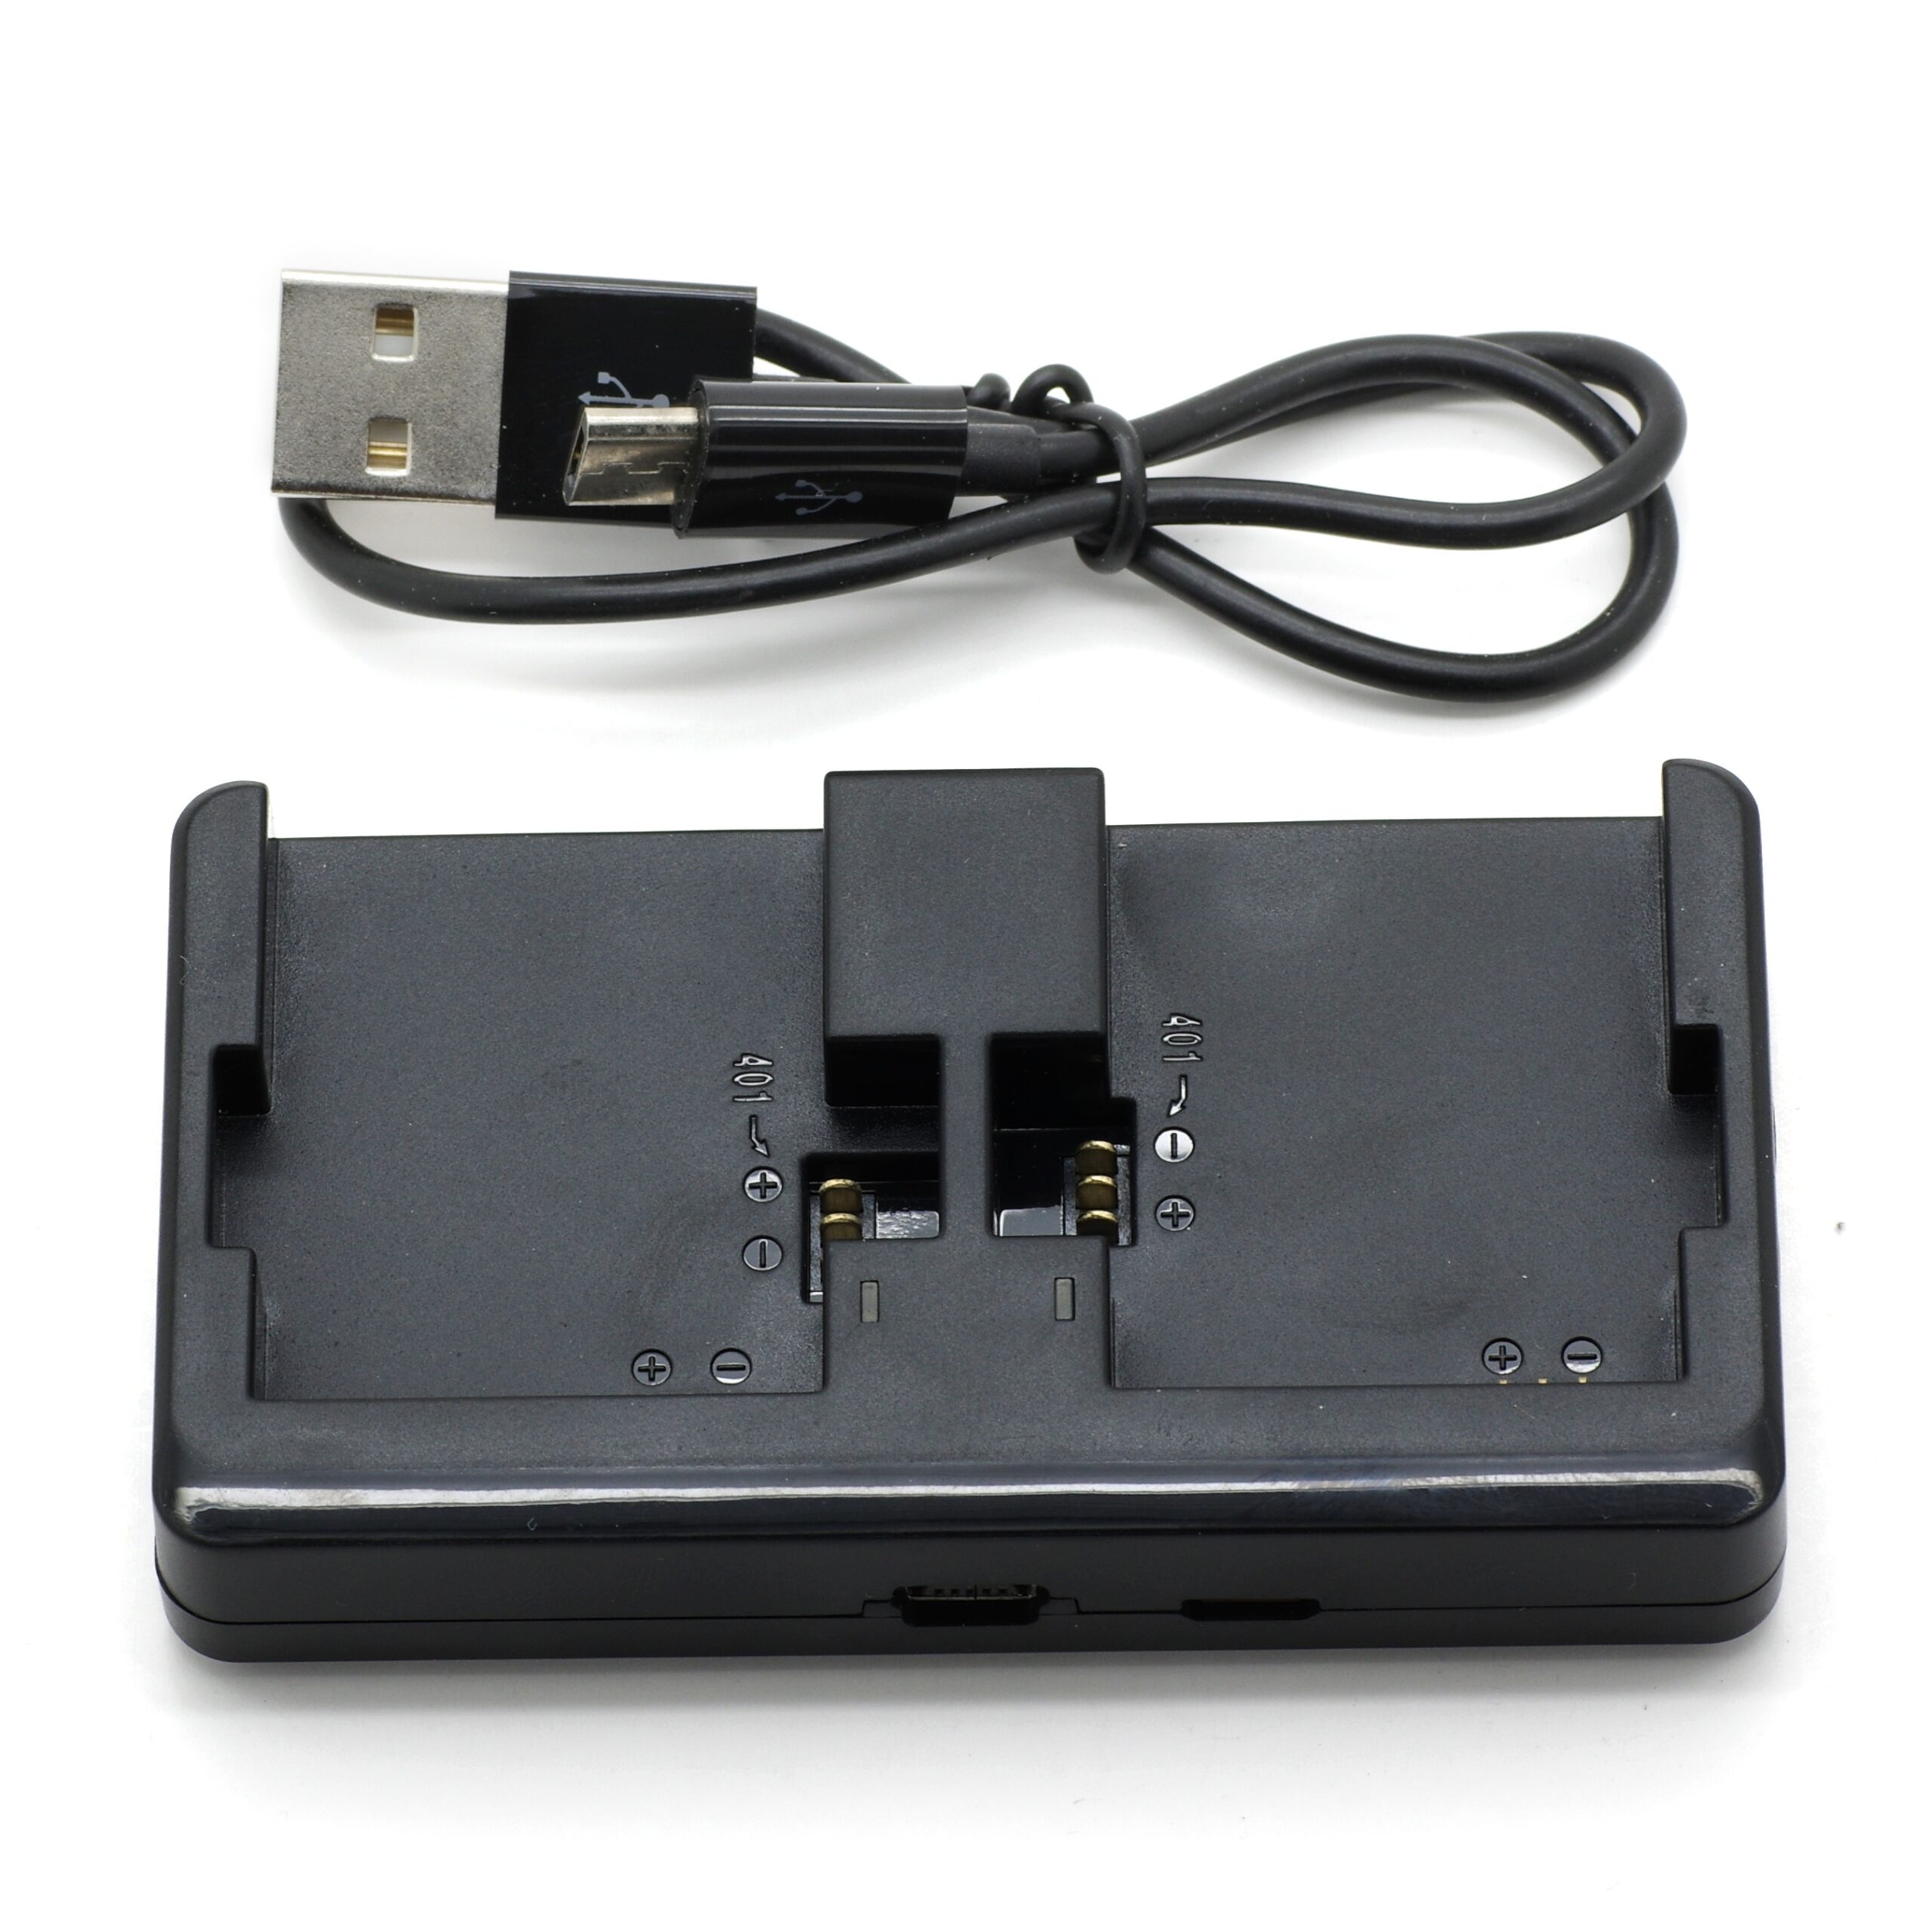 Double chargeur batterie pour GoPro Hero3 / Hero3+